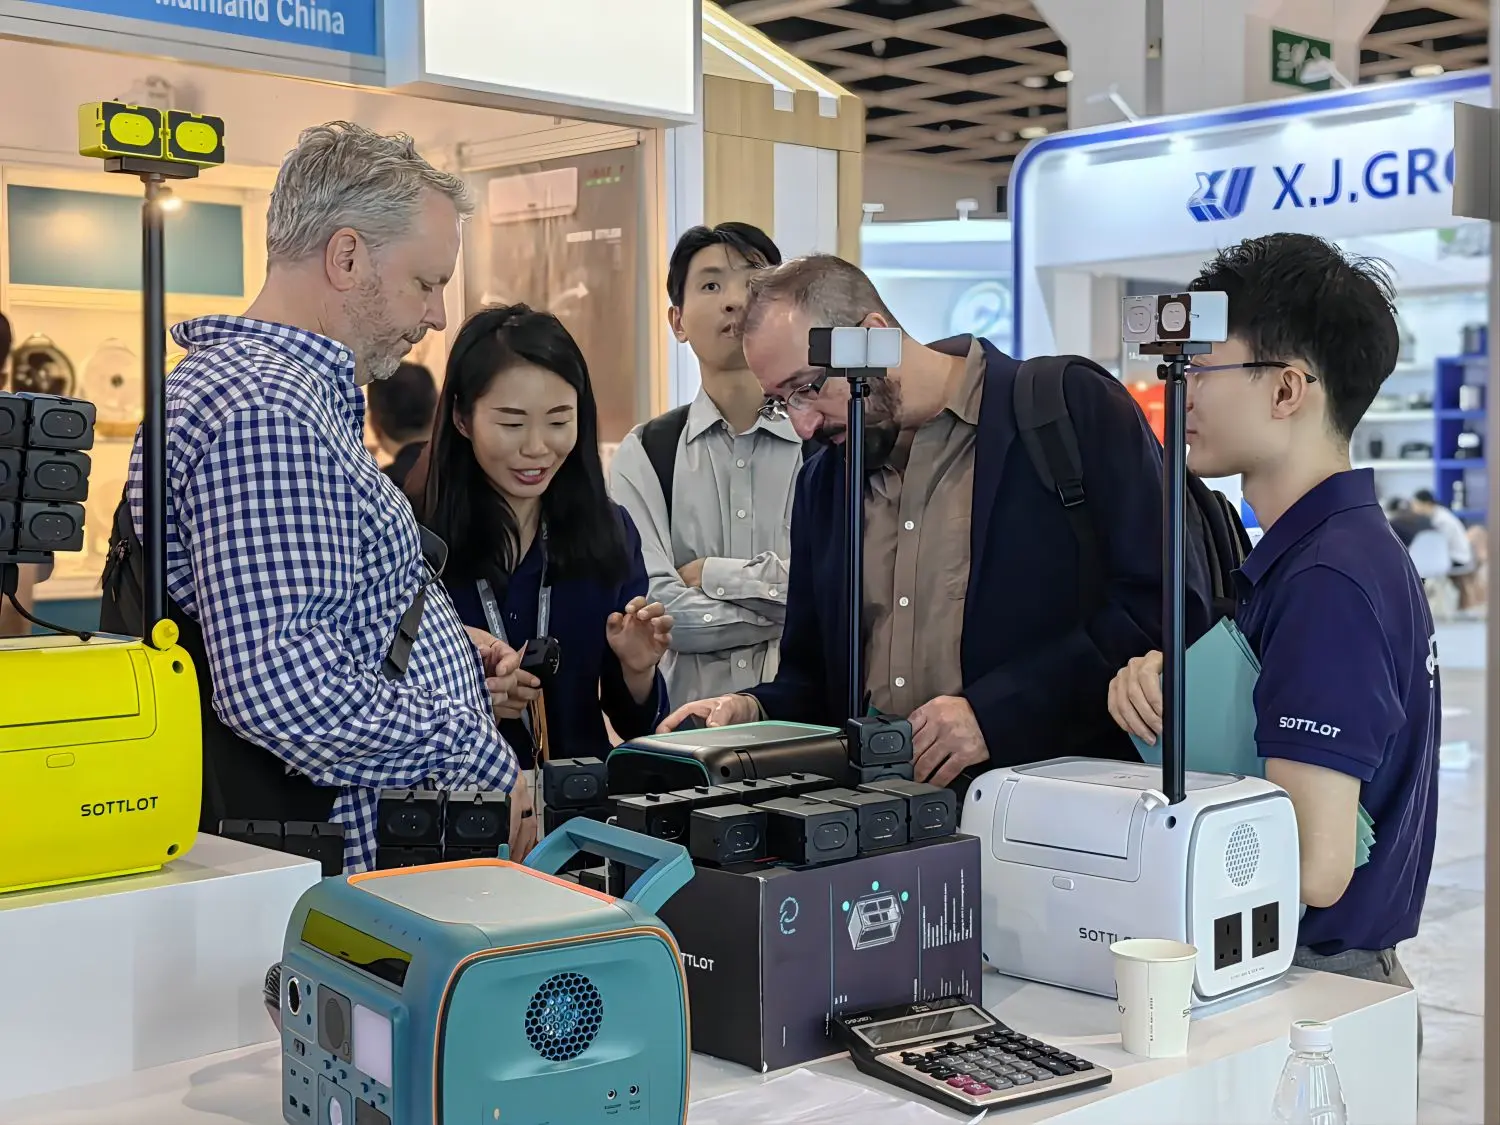 SOTTLOT New Energy's Alpha800 Portable Power Station Garners Attention at Hong Kong Electronics Fair